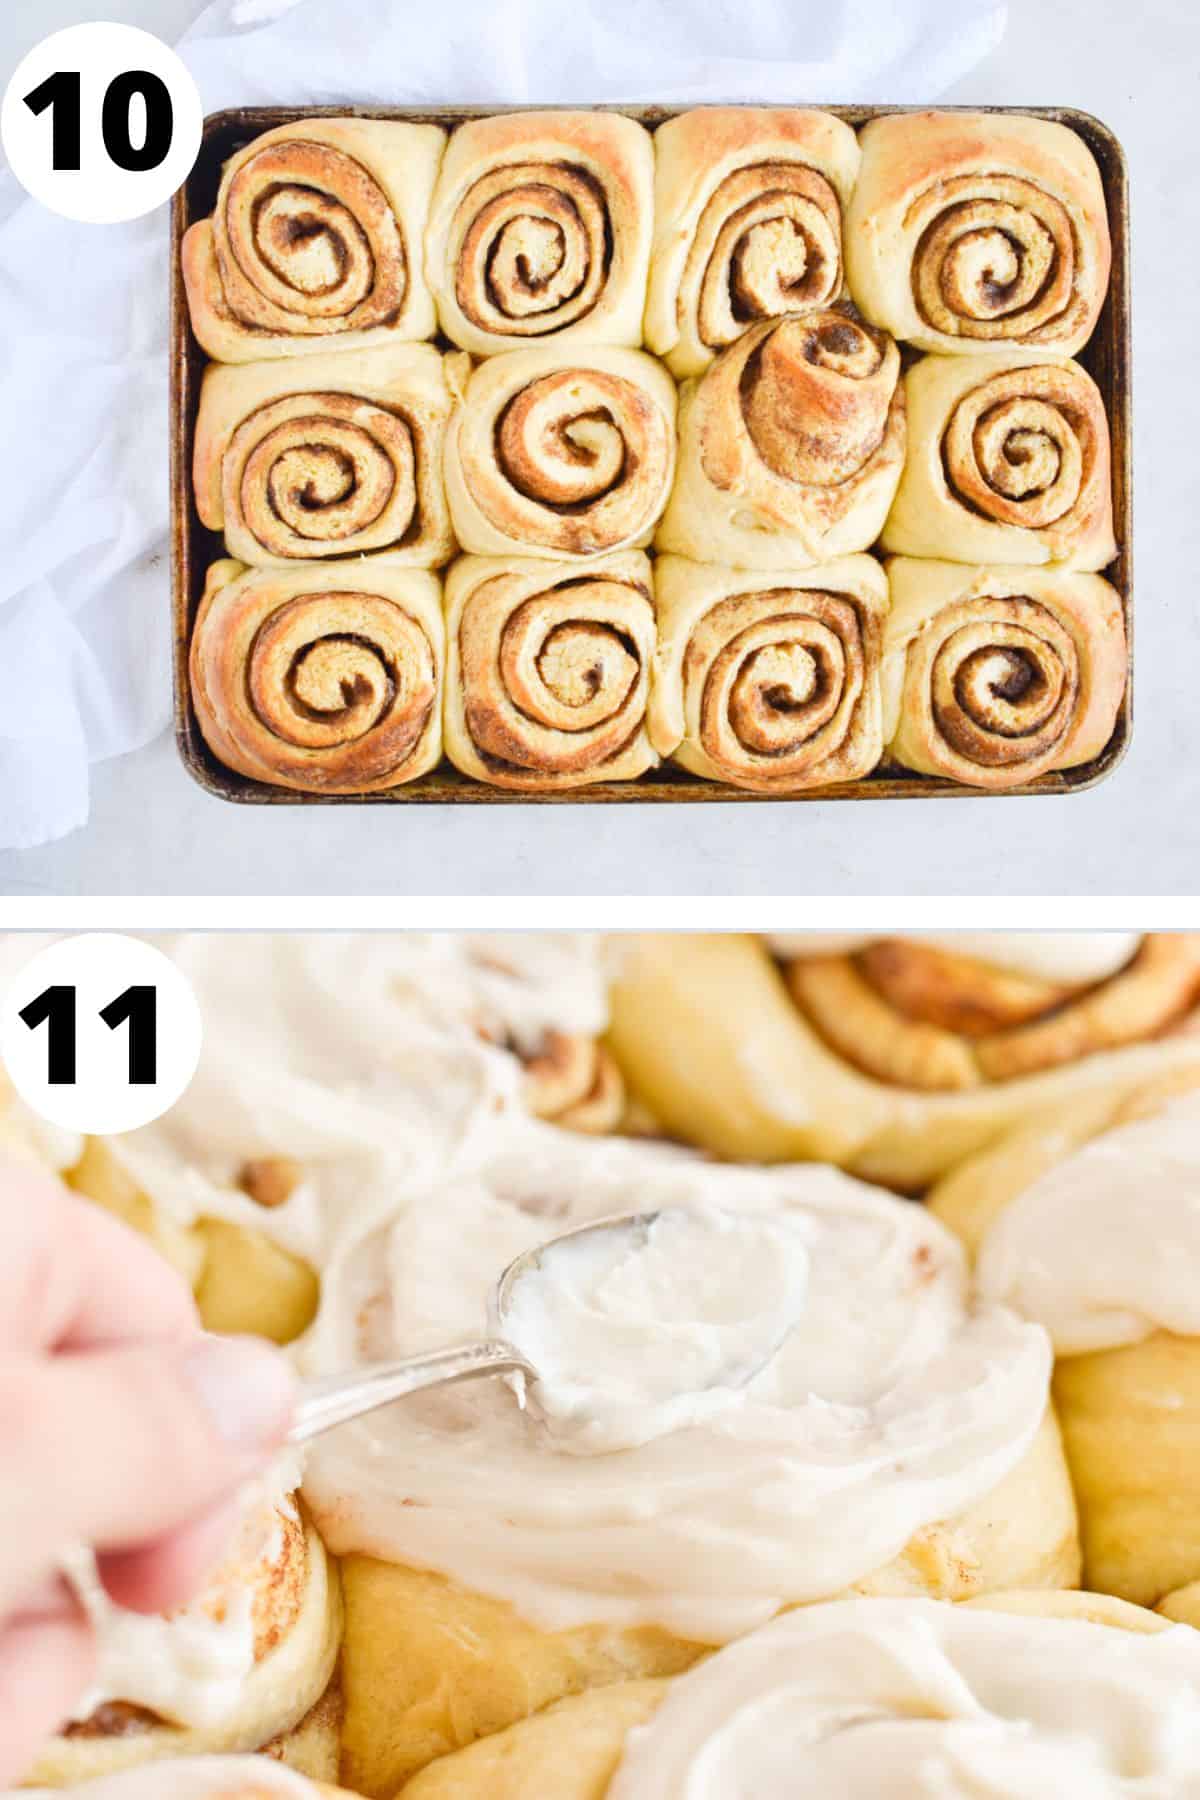 two images showing baked cinnamon rolls and frosting being spread over top. 